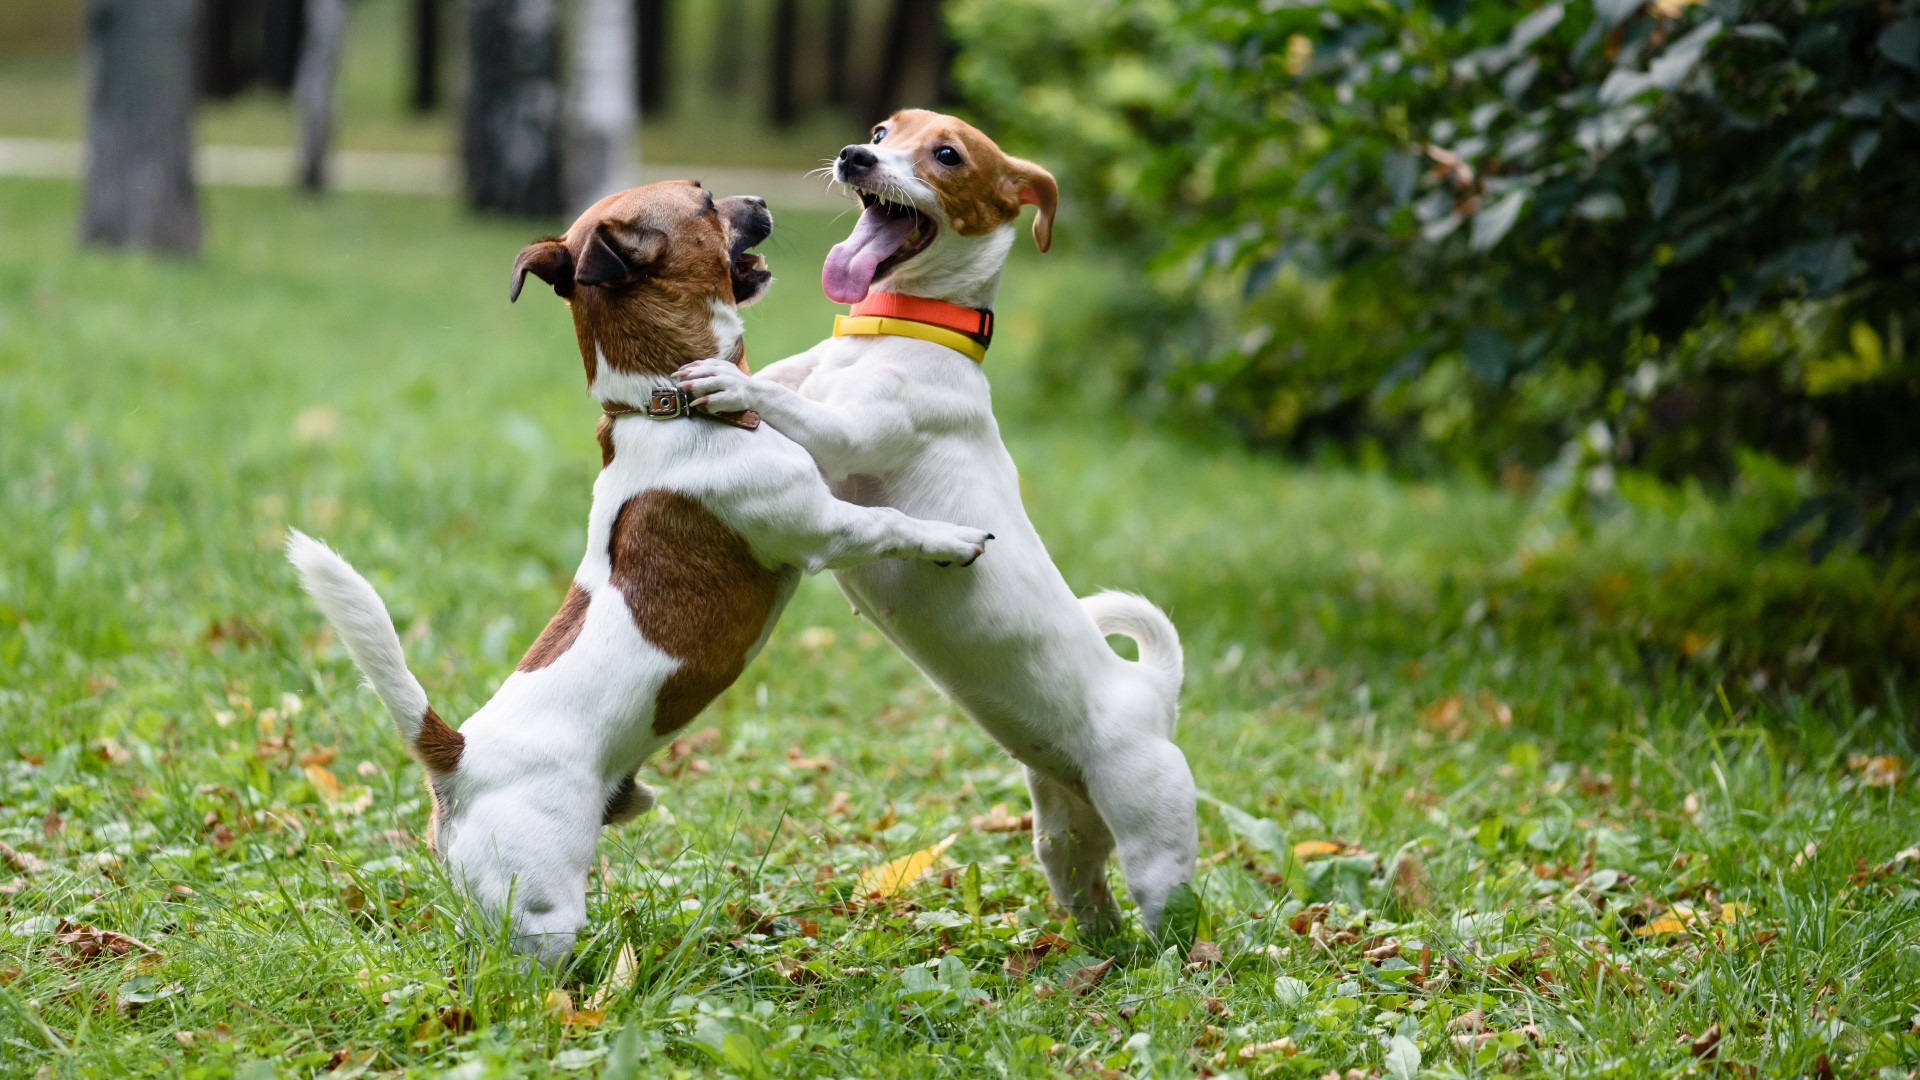 Four rules for managing play fighting between your dogs, according to an expert